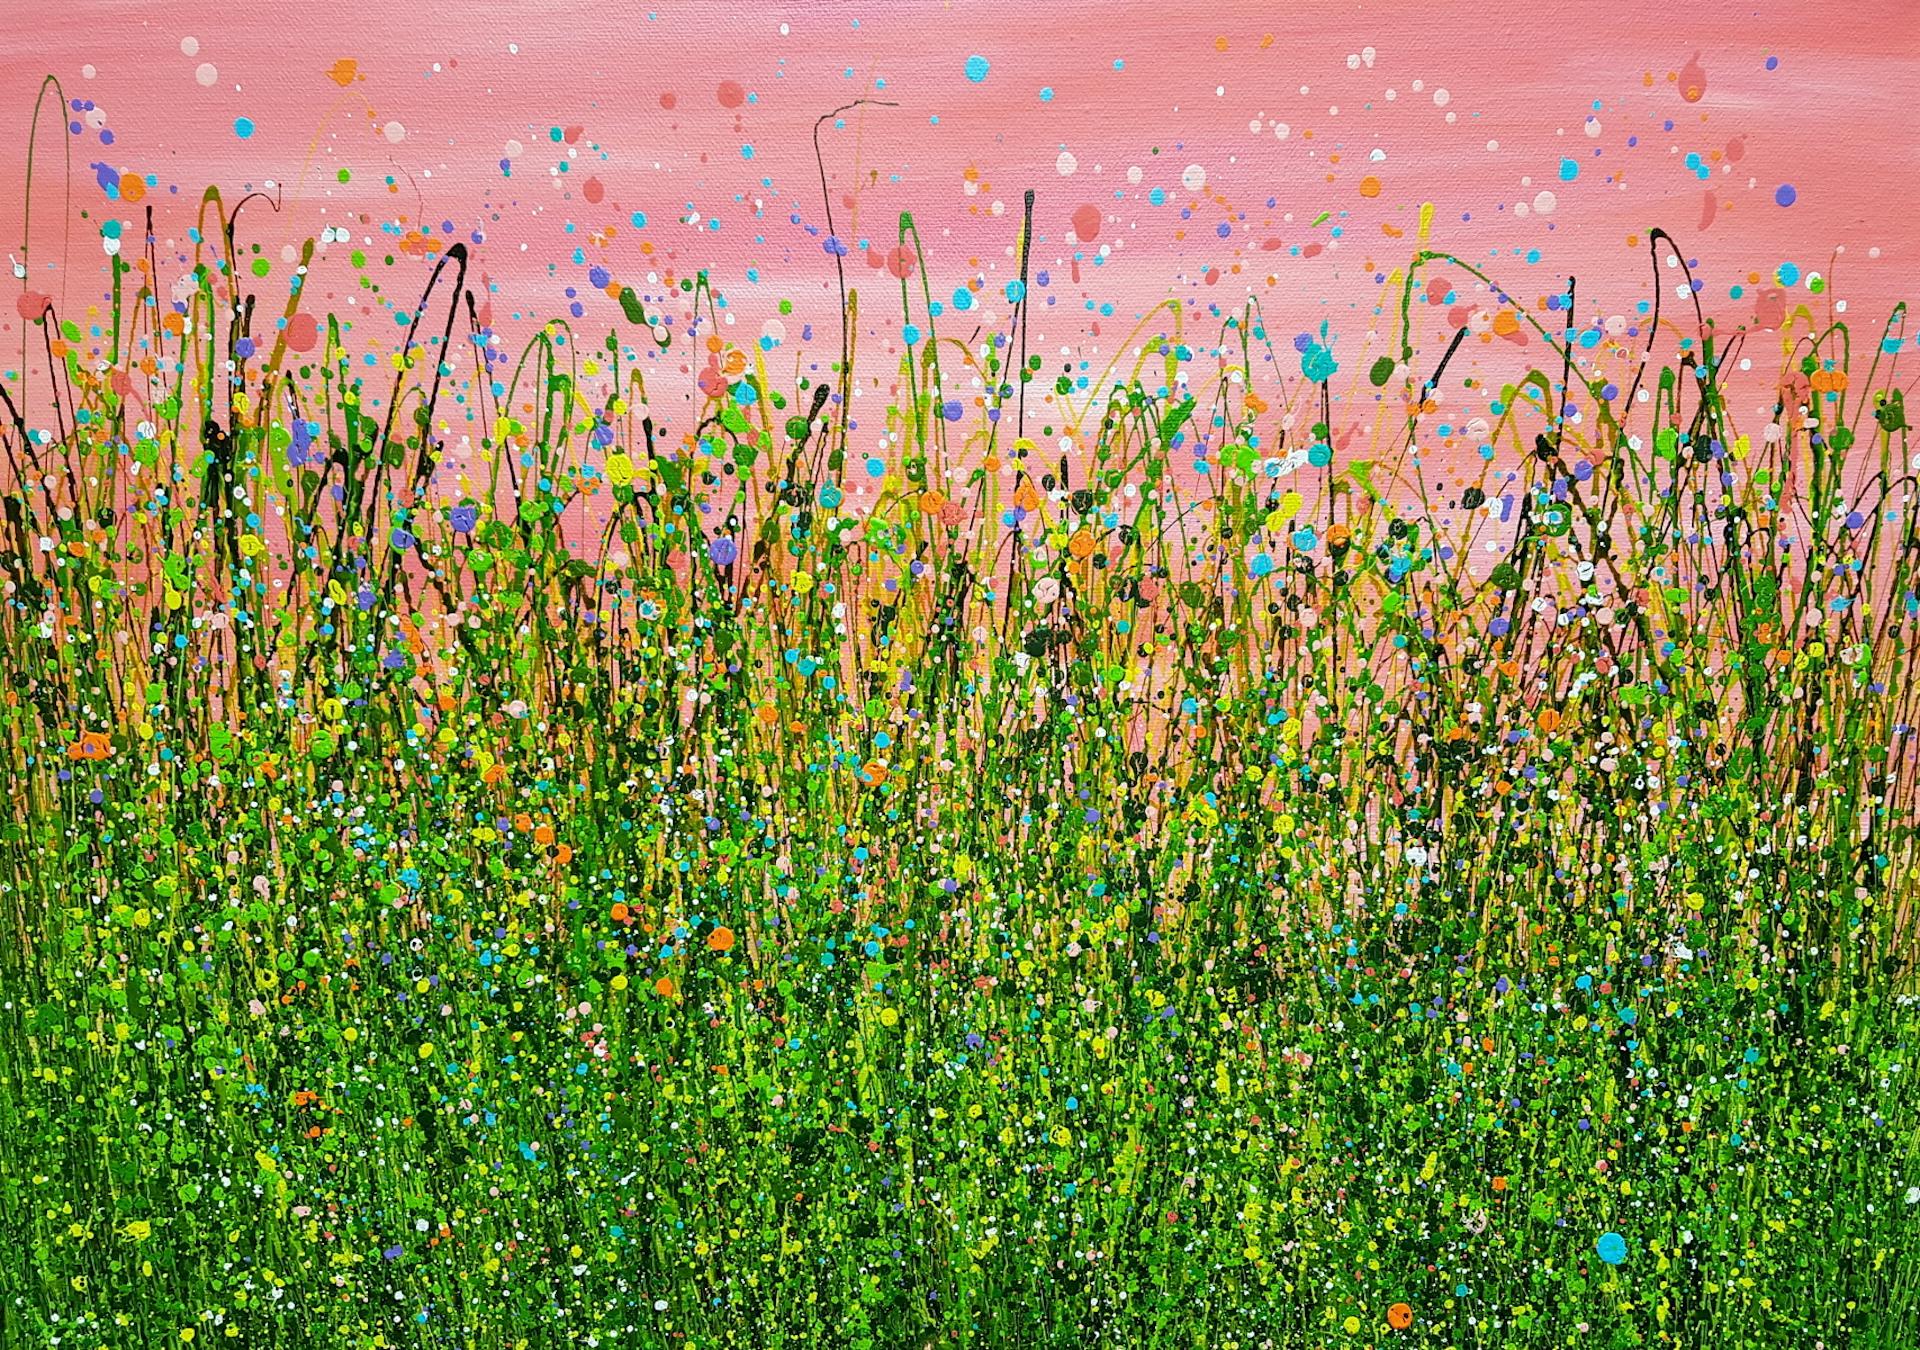 Lucy Moore
Flamingo Sky Meadows #3
Original Landscape Painting
Acrylic Paint on Canvas
Canvas Size: H 42 cm x W 59 cm x D 1.5 cm
Sold Unframed
Please note that in situ images are purely an indication of how a piece may look.

Original semi-abstract